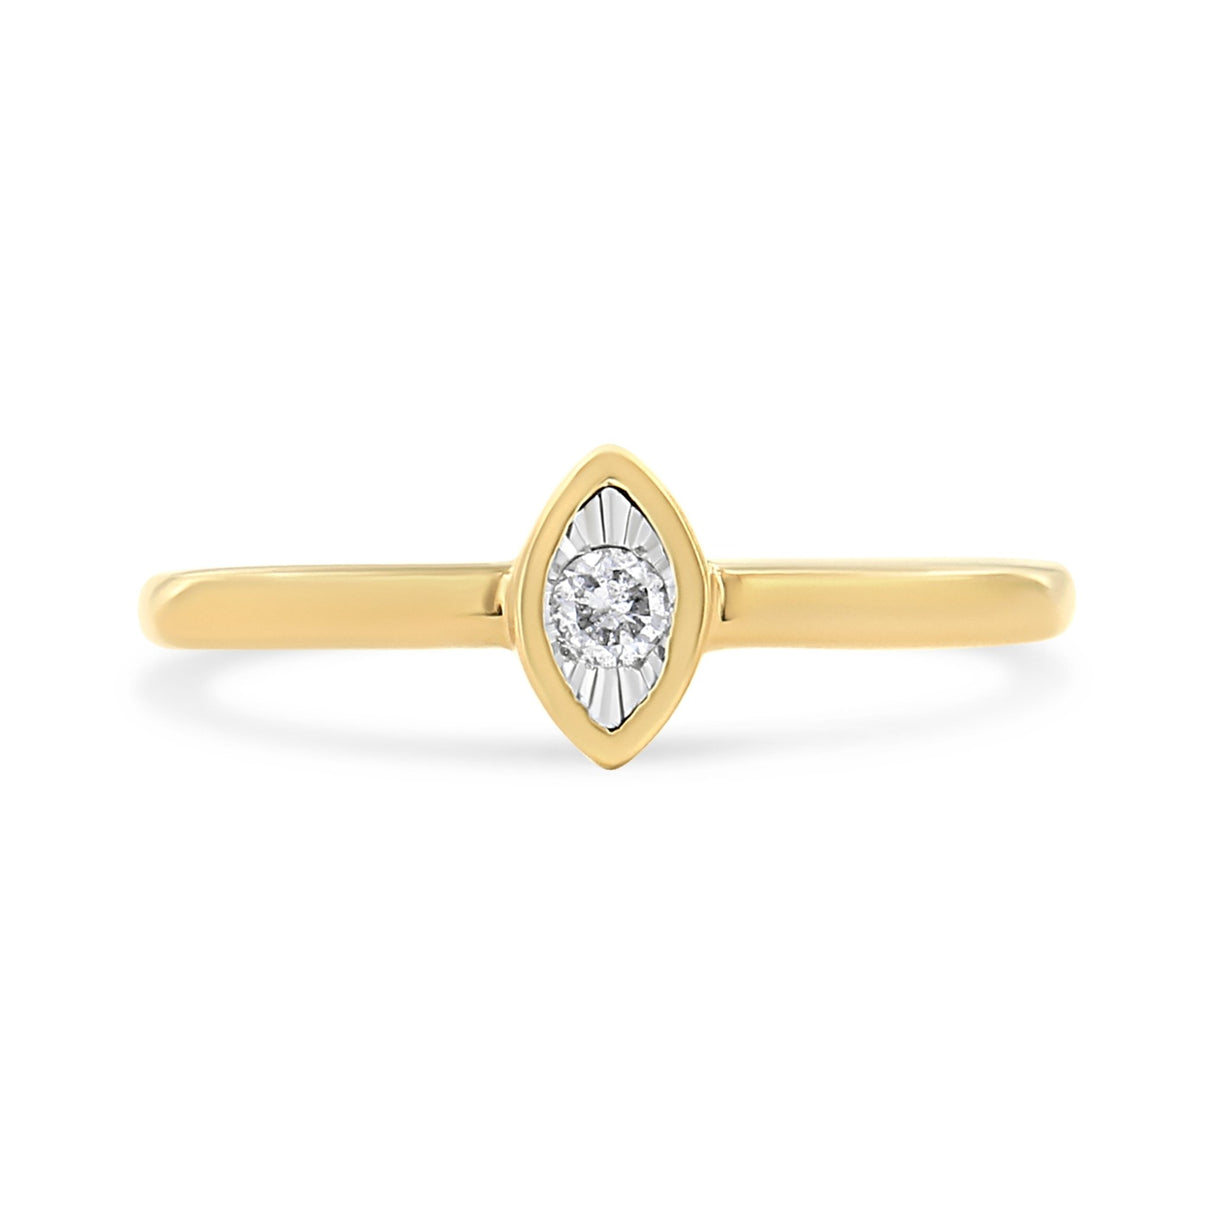 14K Yellow Gold Plated .925 Sterling Silver 1/20 Cttw Miracle Set Diamond Ring (J-K Color, I1-I2 Clarity) - Size 7 - Tuesday Morning-Rings